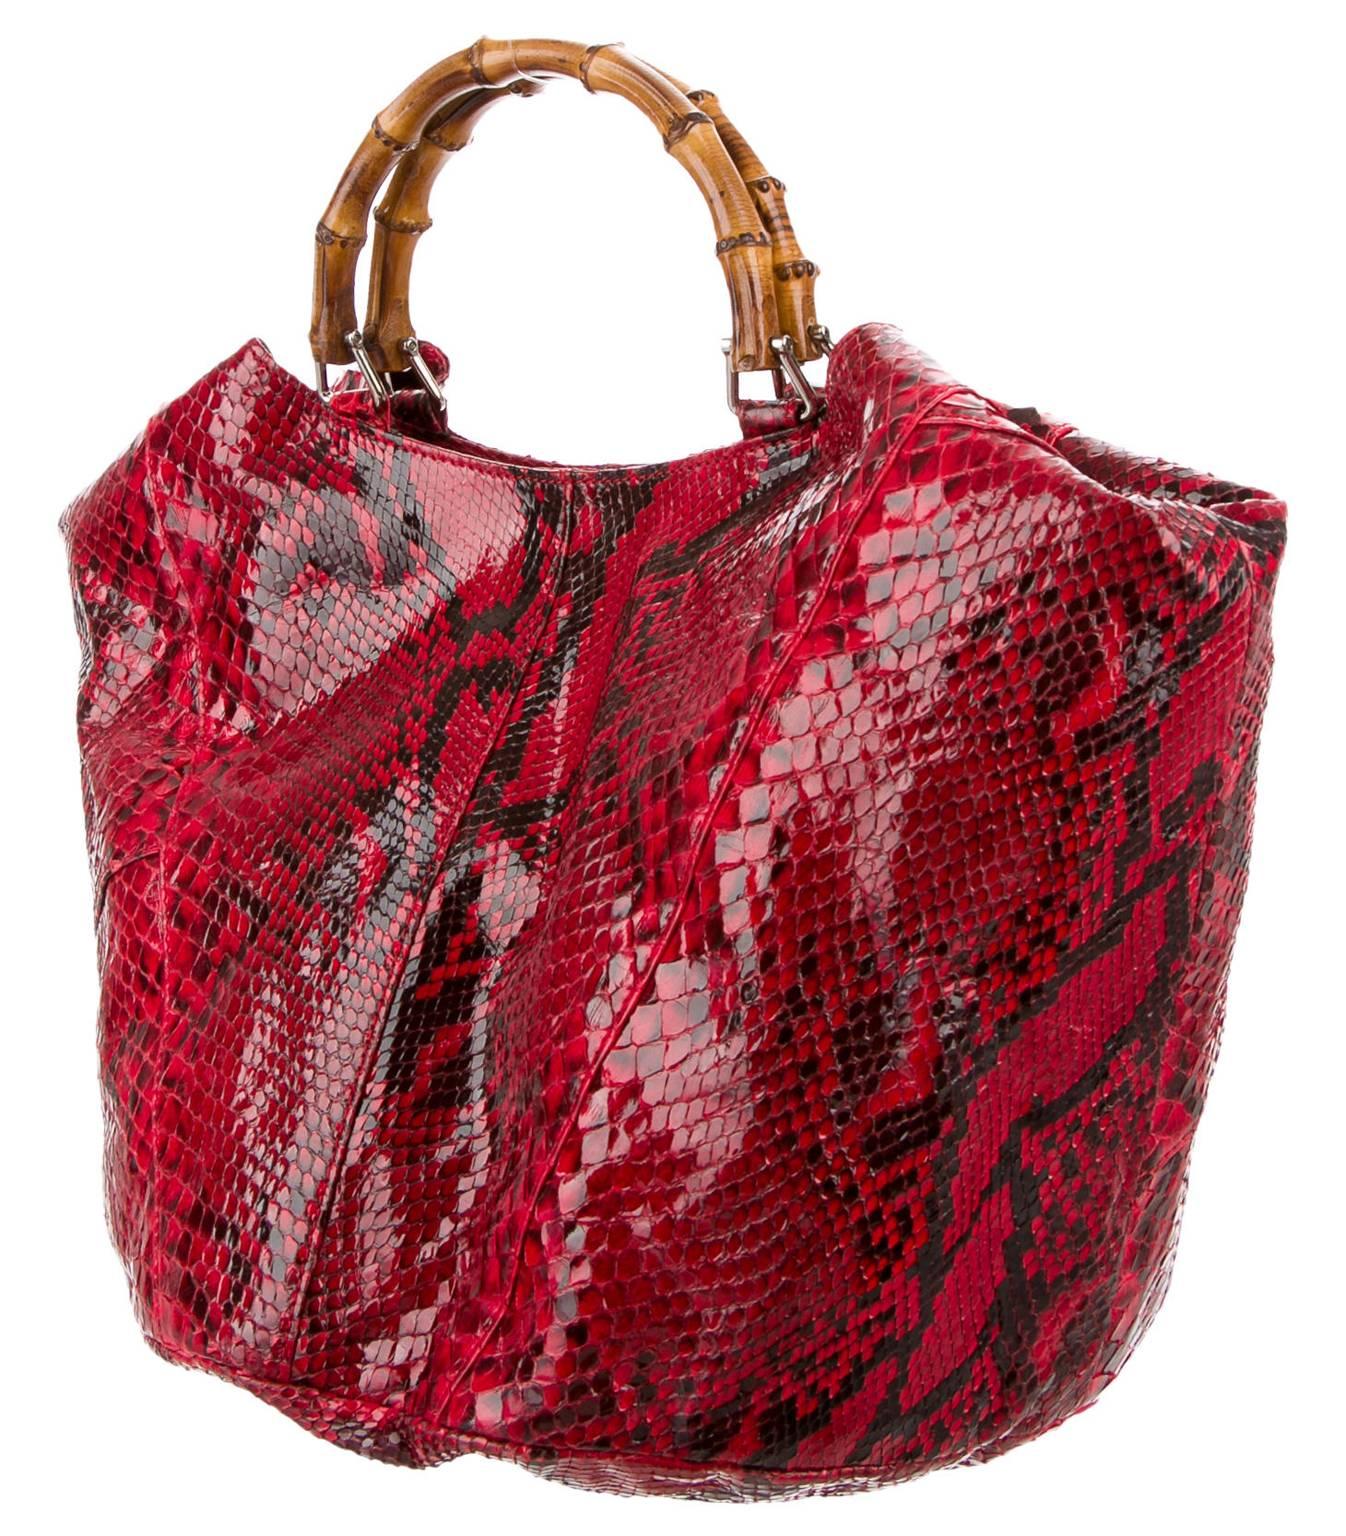 Kate Moss's Incredibly Rare & Iconic Tom Ford For Gucci Spring Summer 1996 Python Leather Runway Ad Campaign Bag In Uber-Rare & Absolutely Gorgeous Red!

The Iconic Collections has been one of the world's leading collectors of Tom Ford for